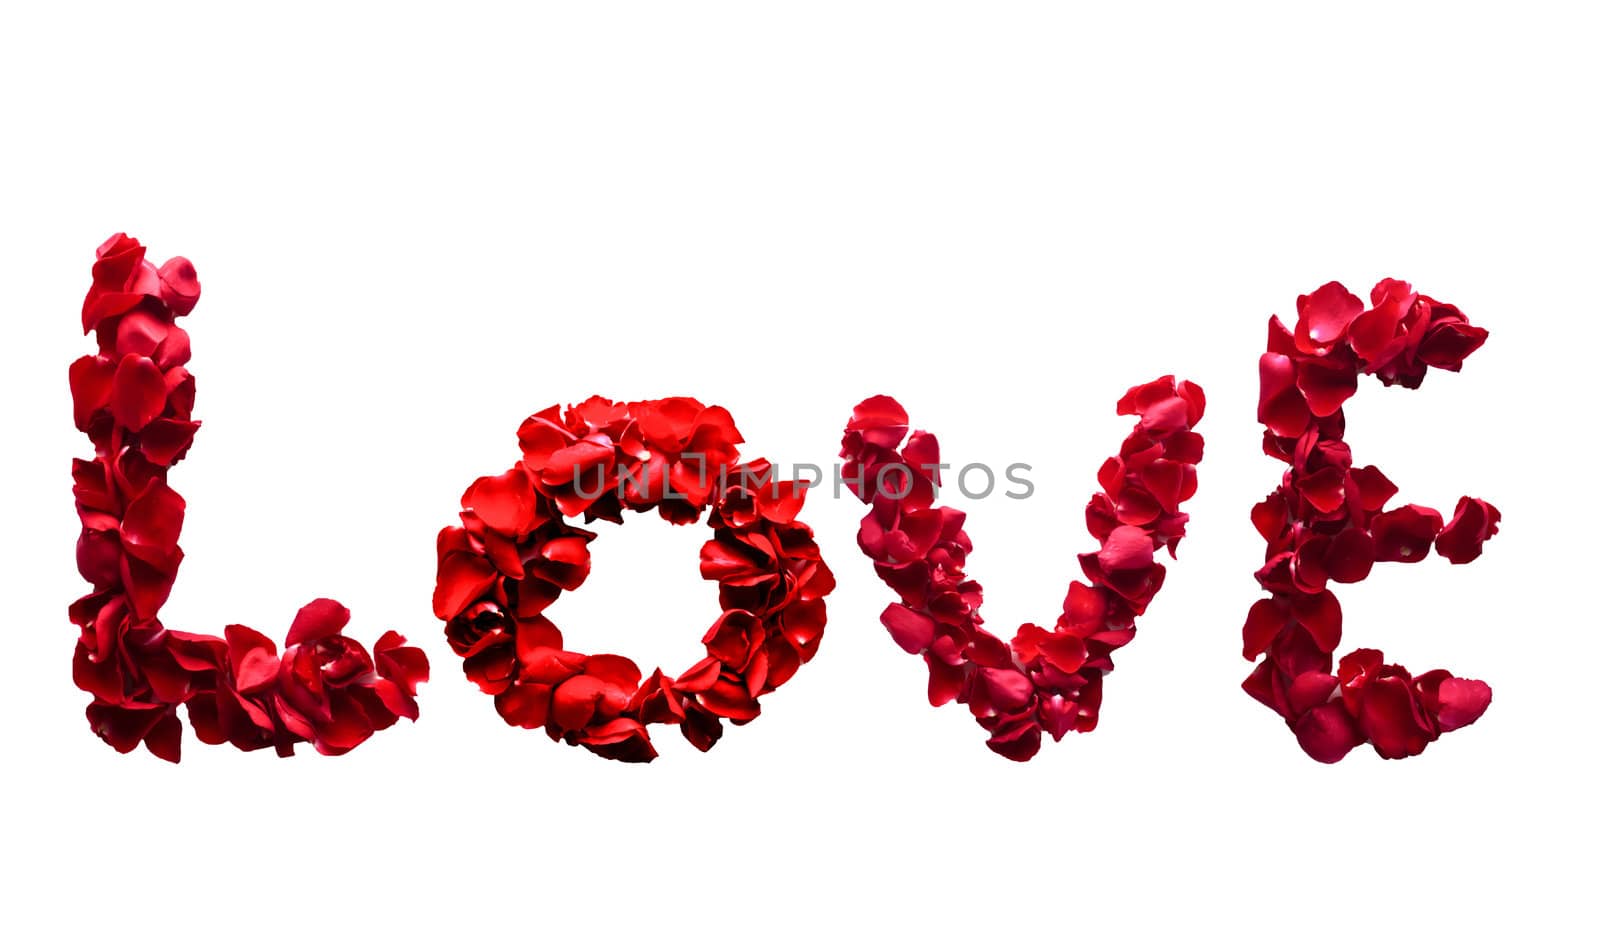 Alphabet letter LovE made from red petals rose isolated on a white background